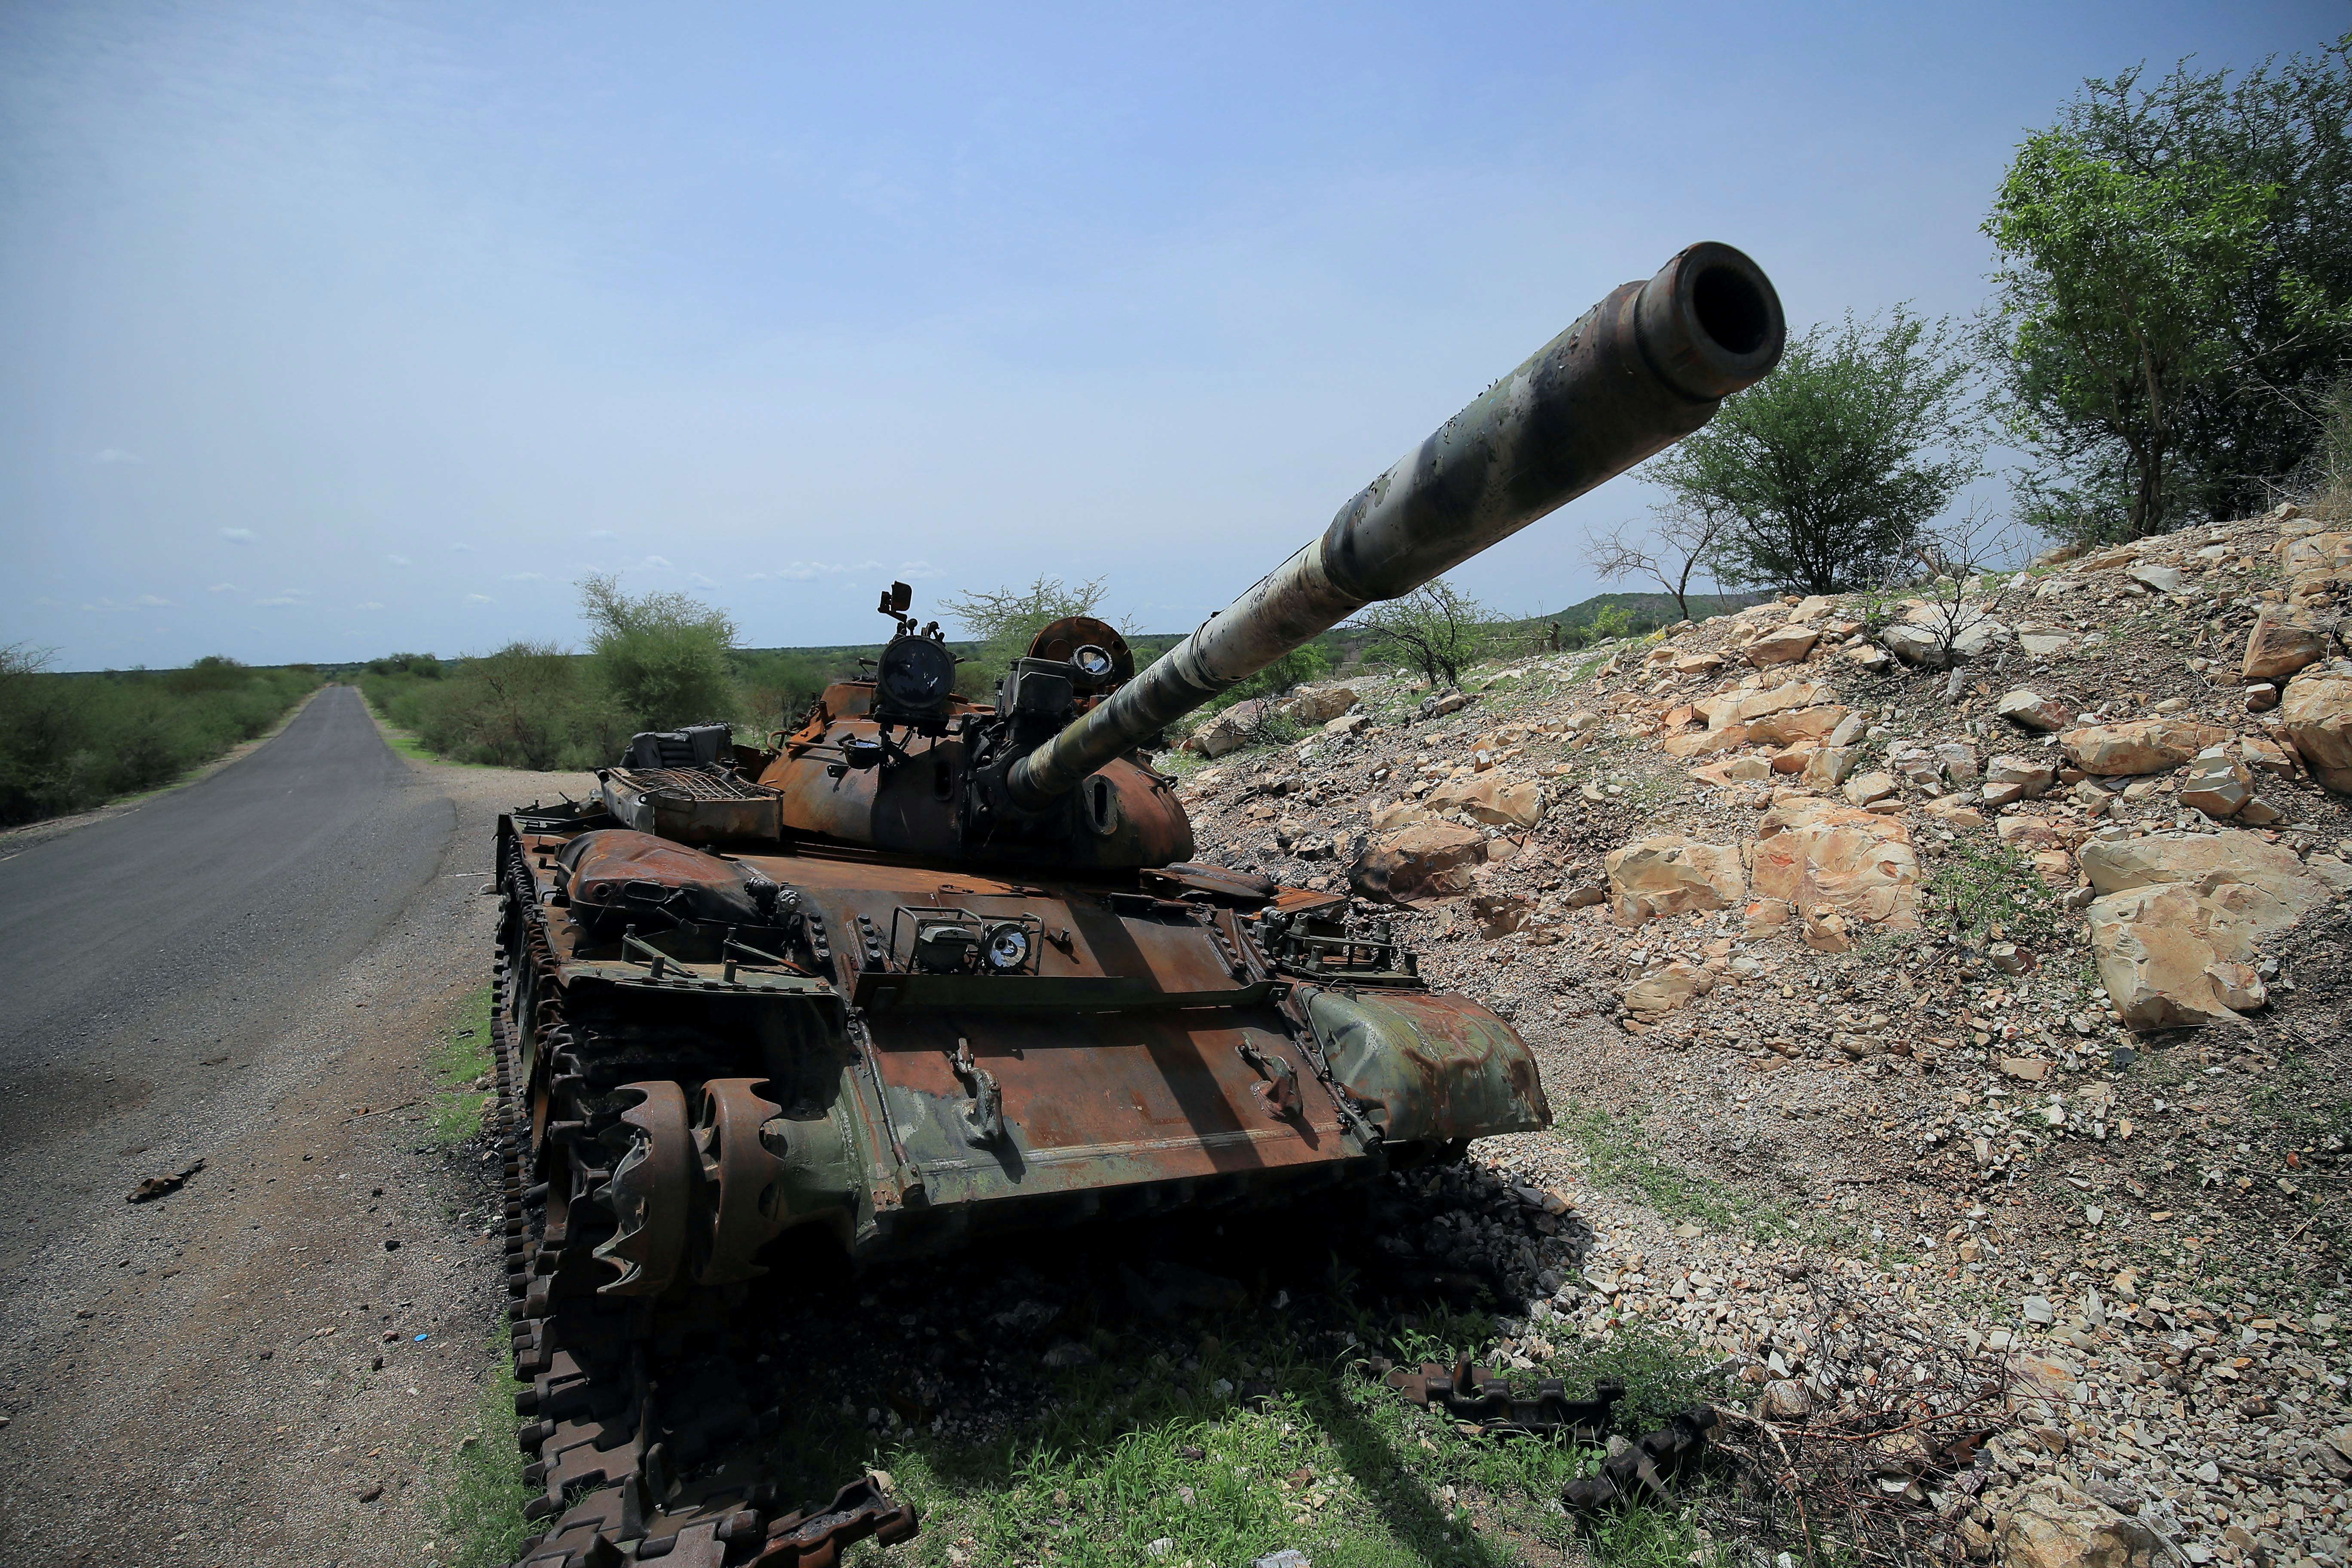 A tank damaged during the fighting between Ethiopia’s National Defense Force (ENDF) and Tigray Special Force stands on the outskirts of Humera town